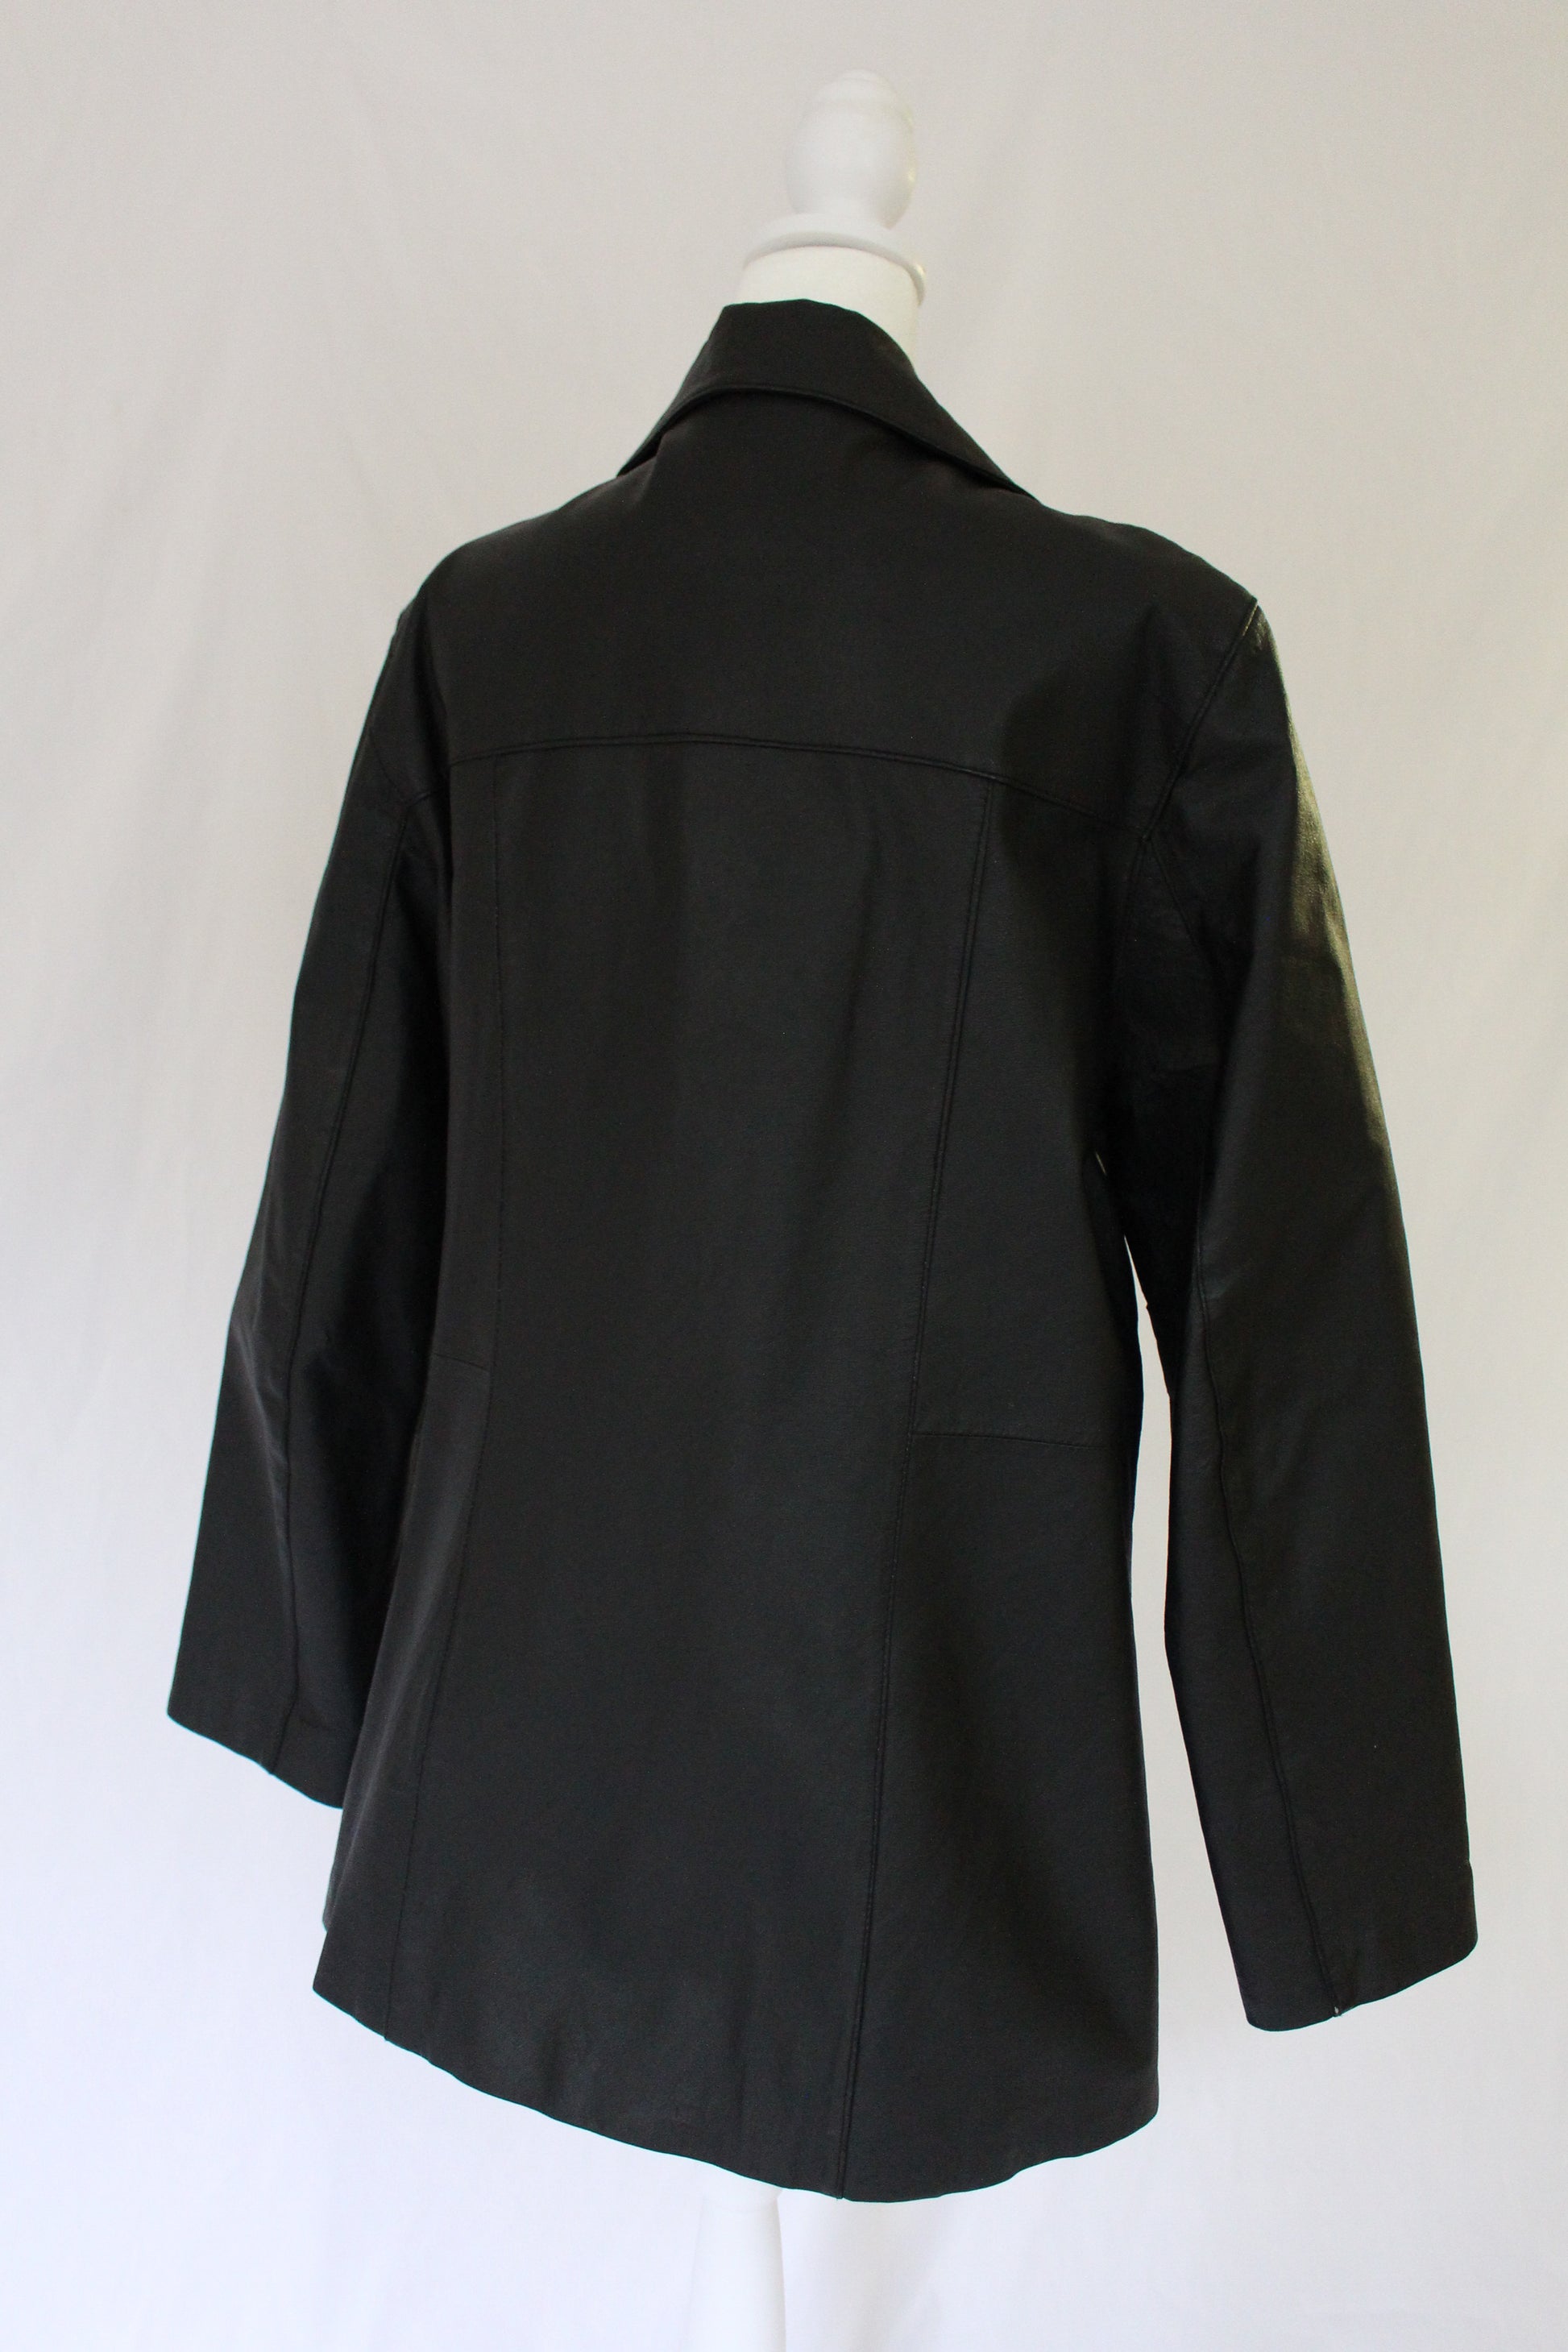 used black leather coat, black leather jacket with buttons